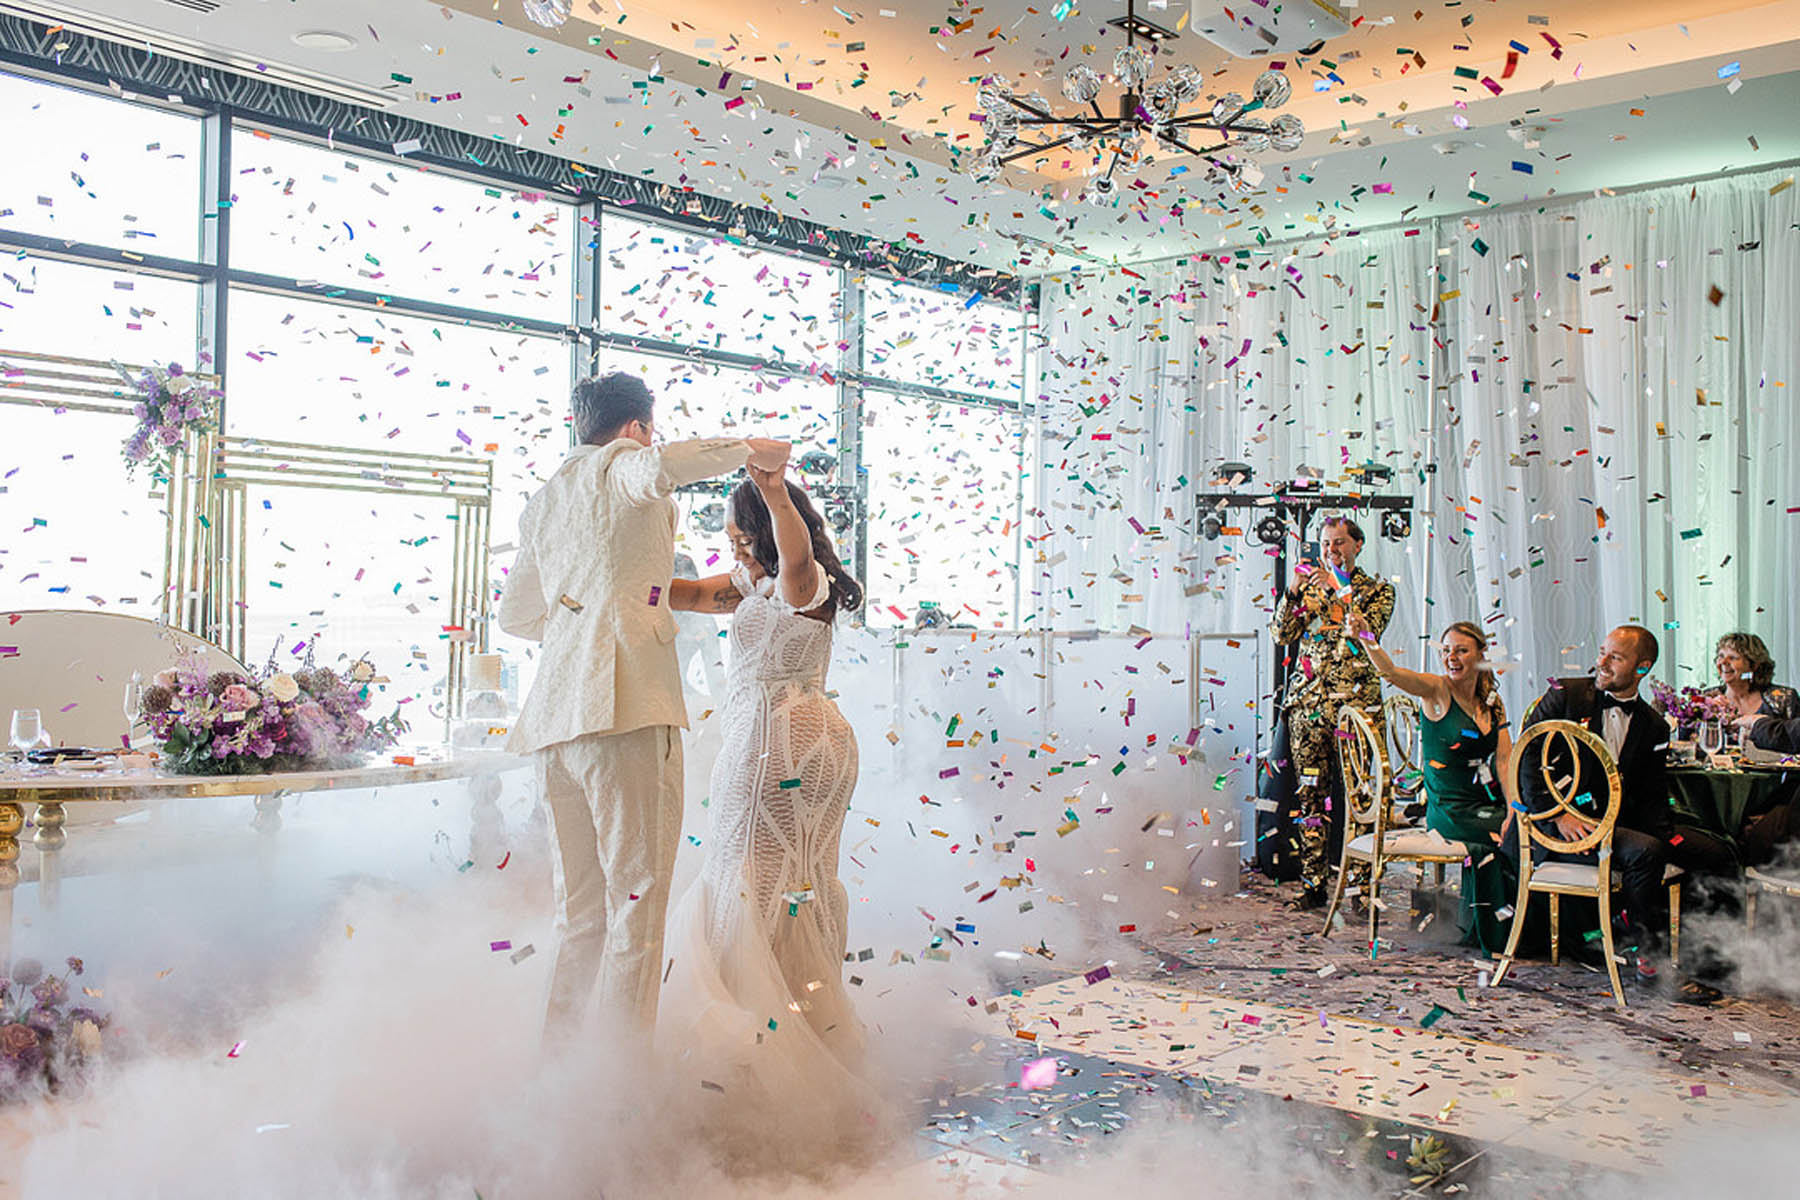 The marriers dance together in a mist of manufactured fog and confetti 